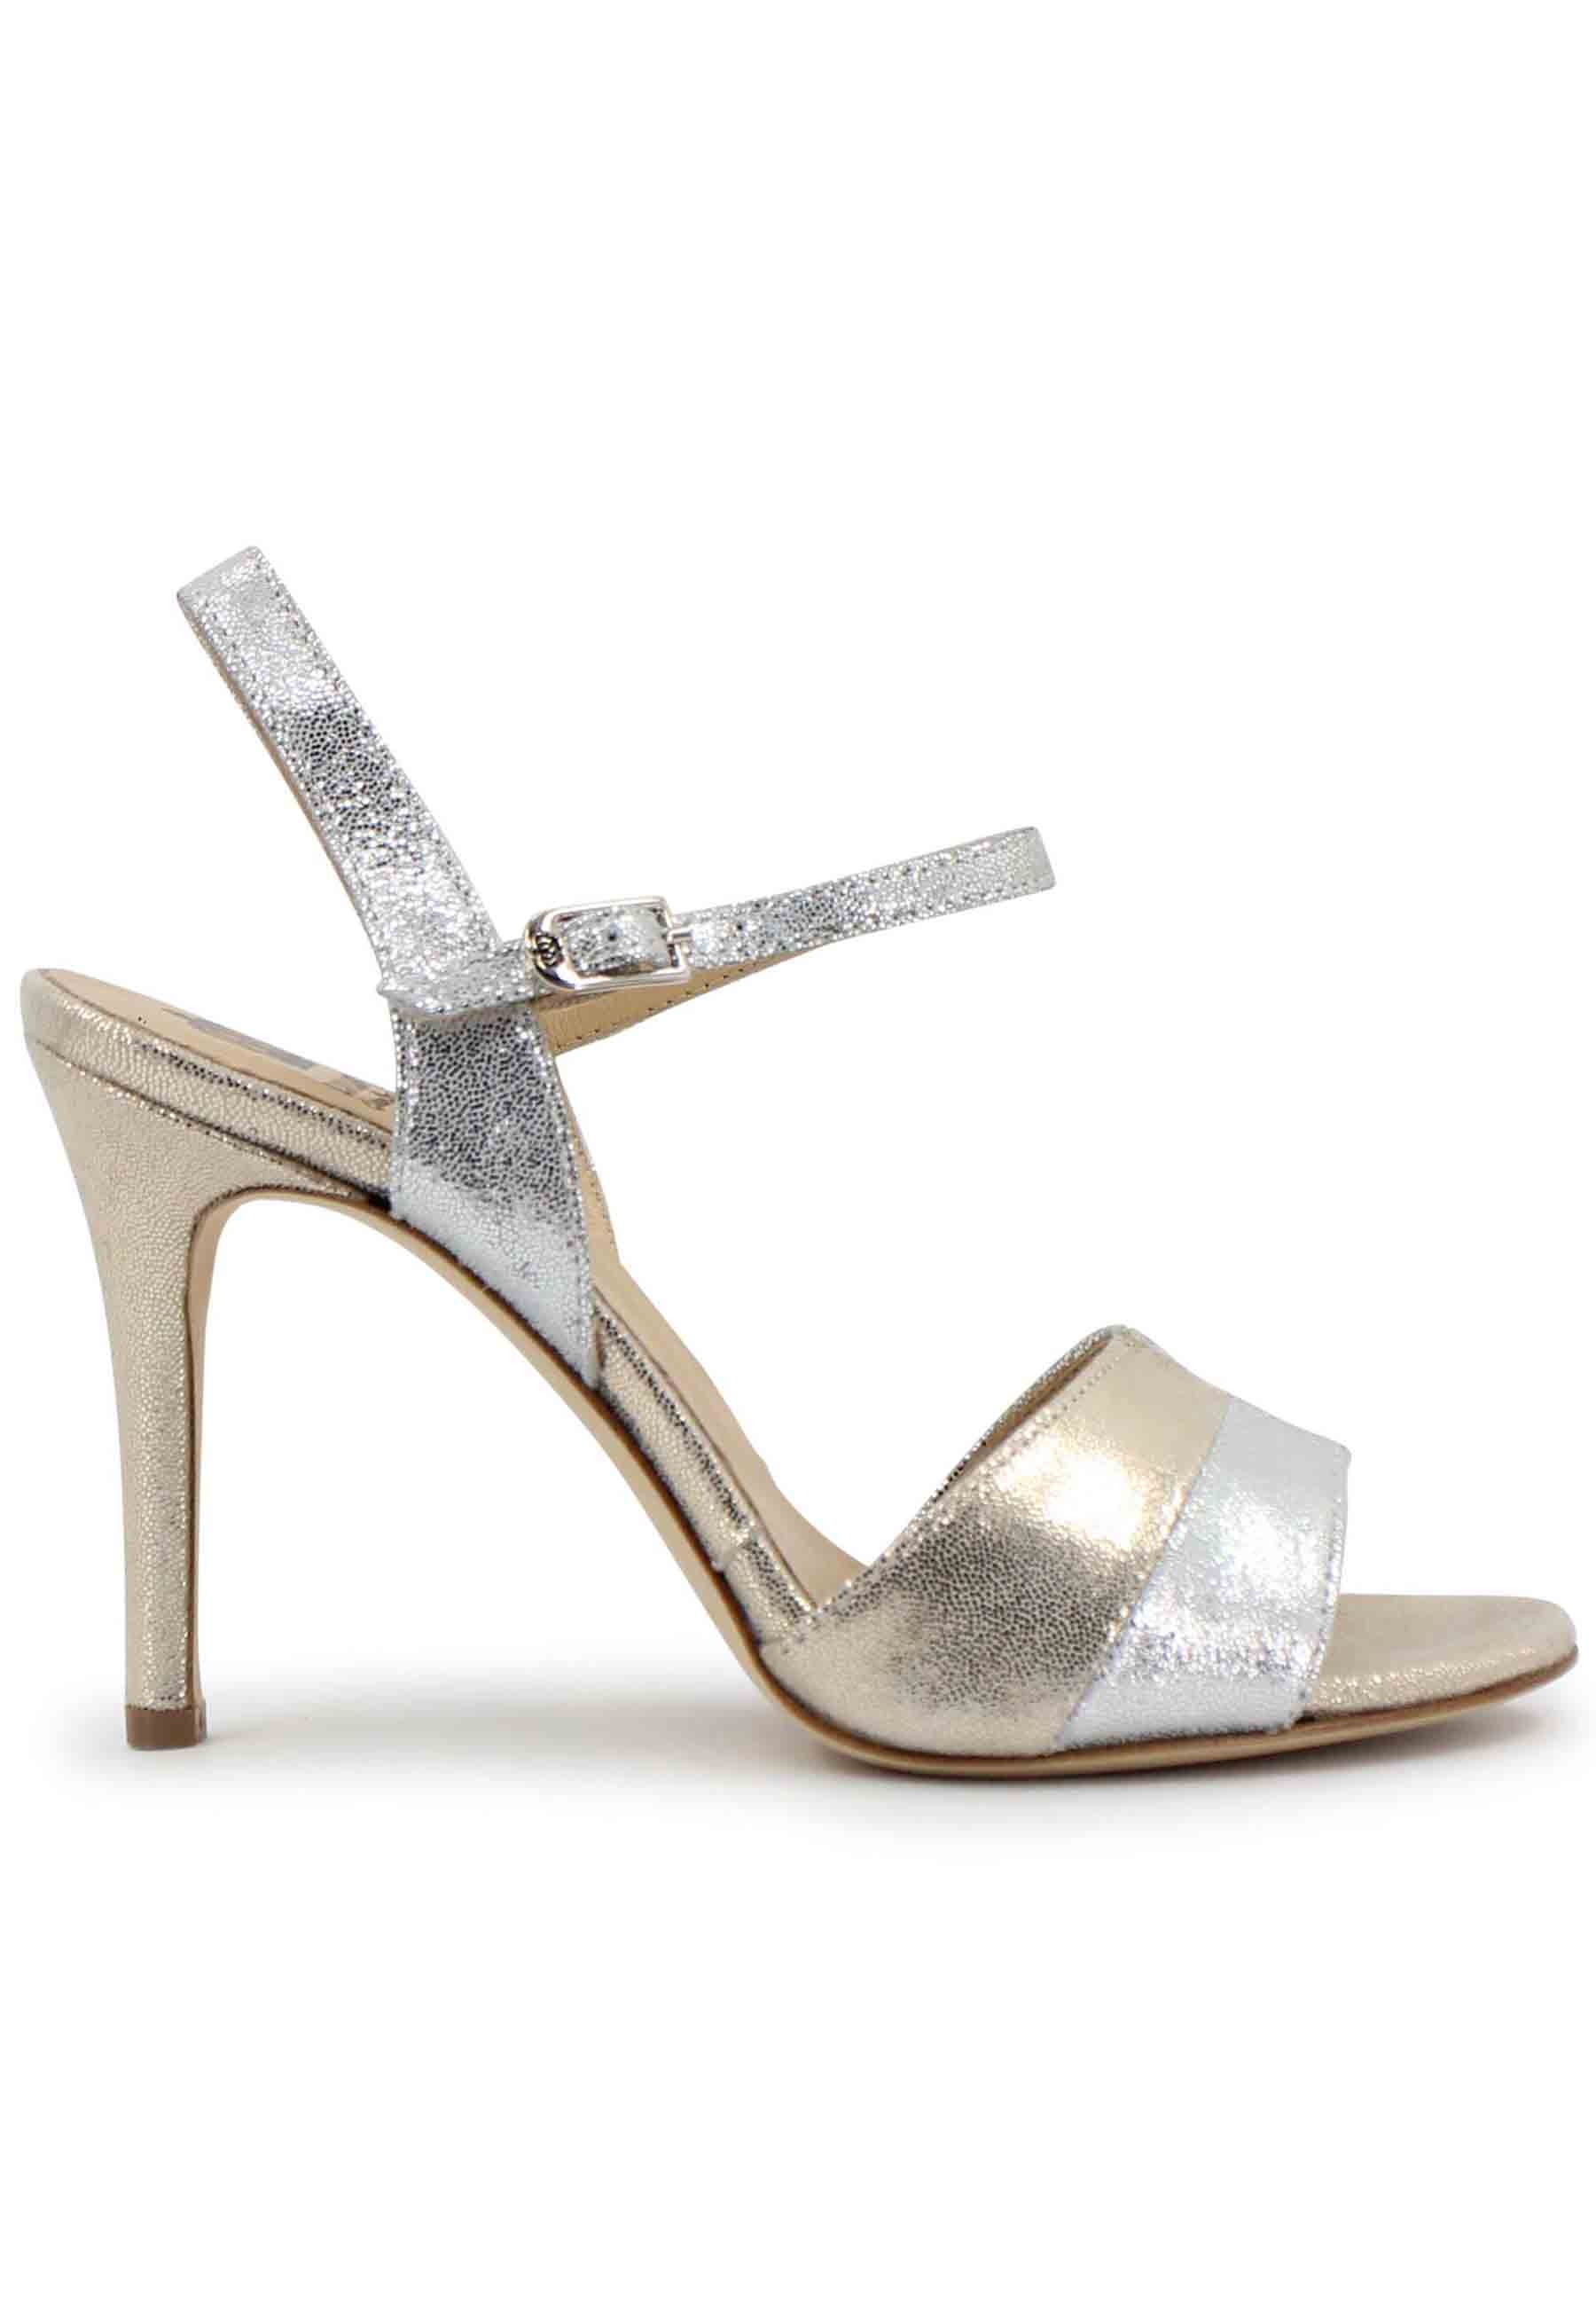 Women's sandals in silver laminated leather with high heel and ankle strap